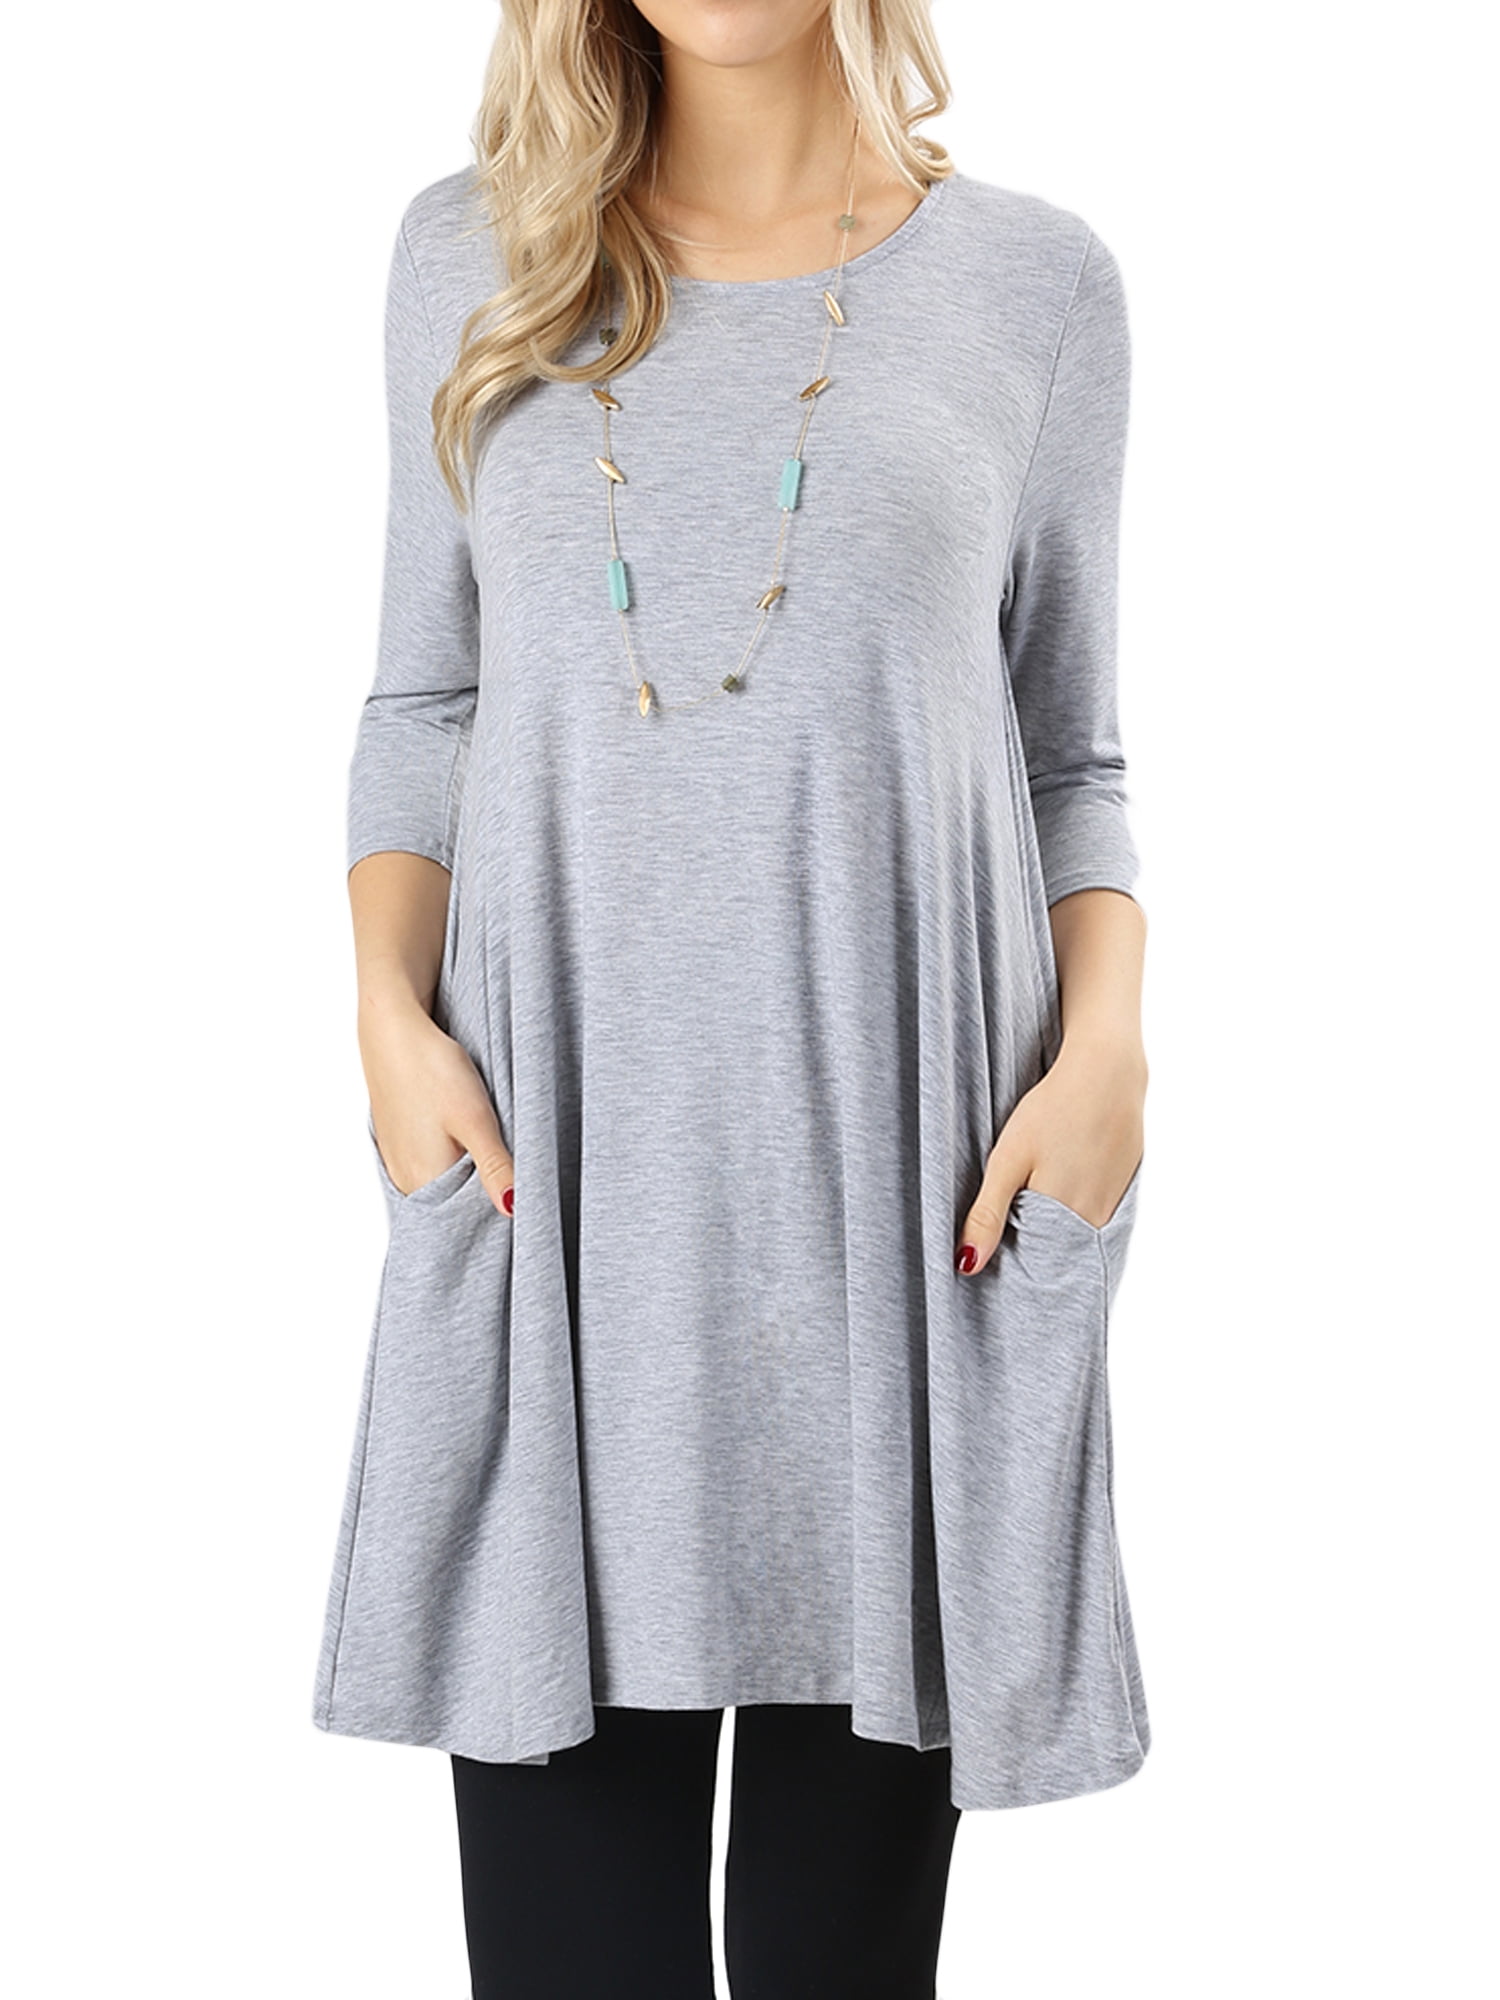 TheLovely - Women Round Neck Long or 3/4 Sleeve Flattering Comfy Swing ...